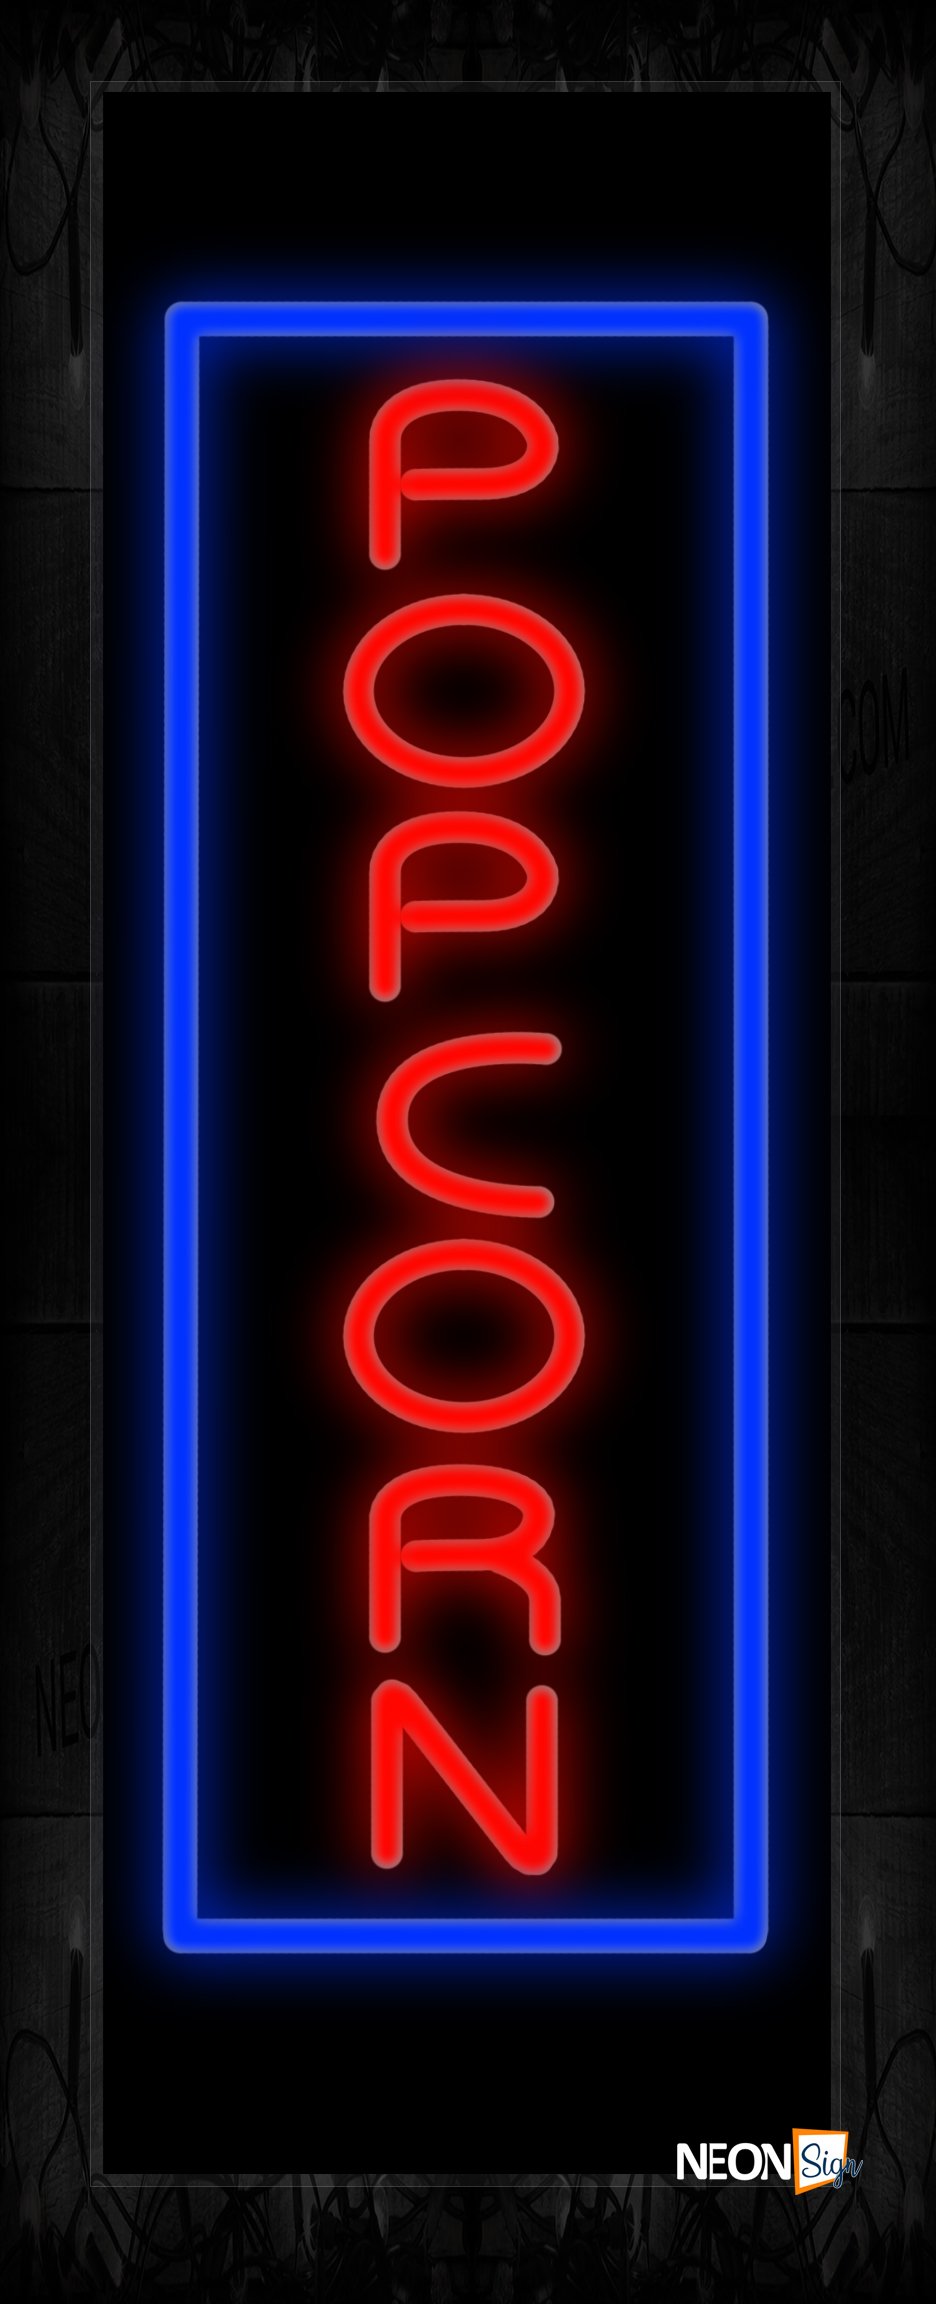 Image of 11612 Popcorn in red with blue border (Vertical) Neon Sign 13x32 Black Backing